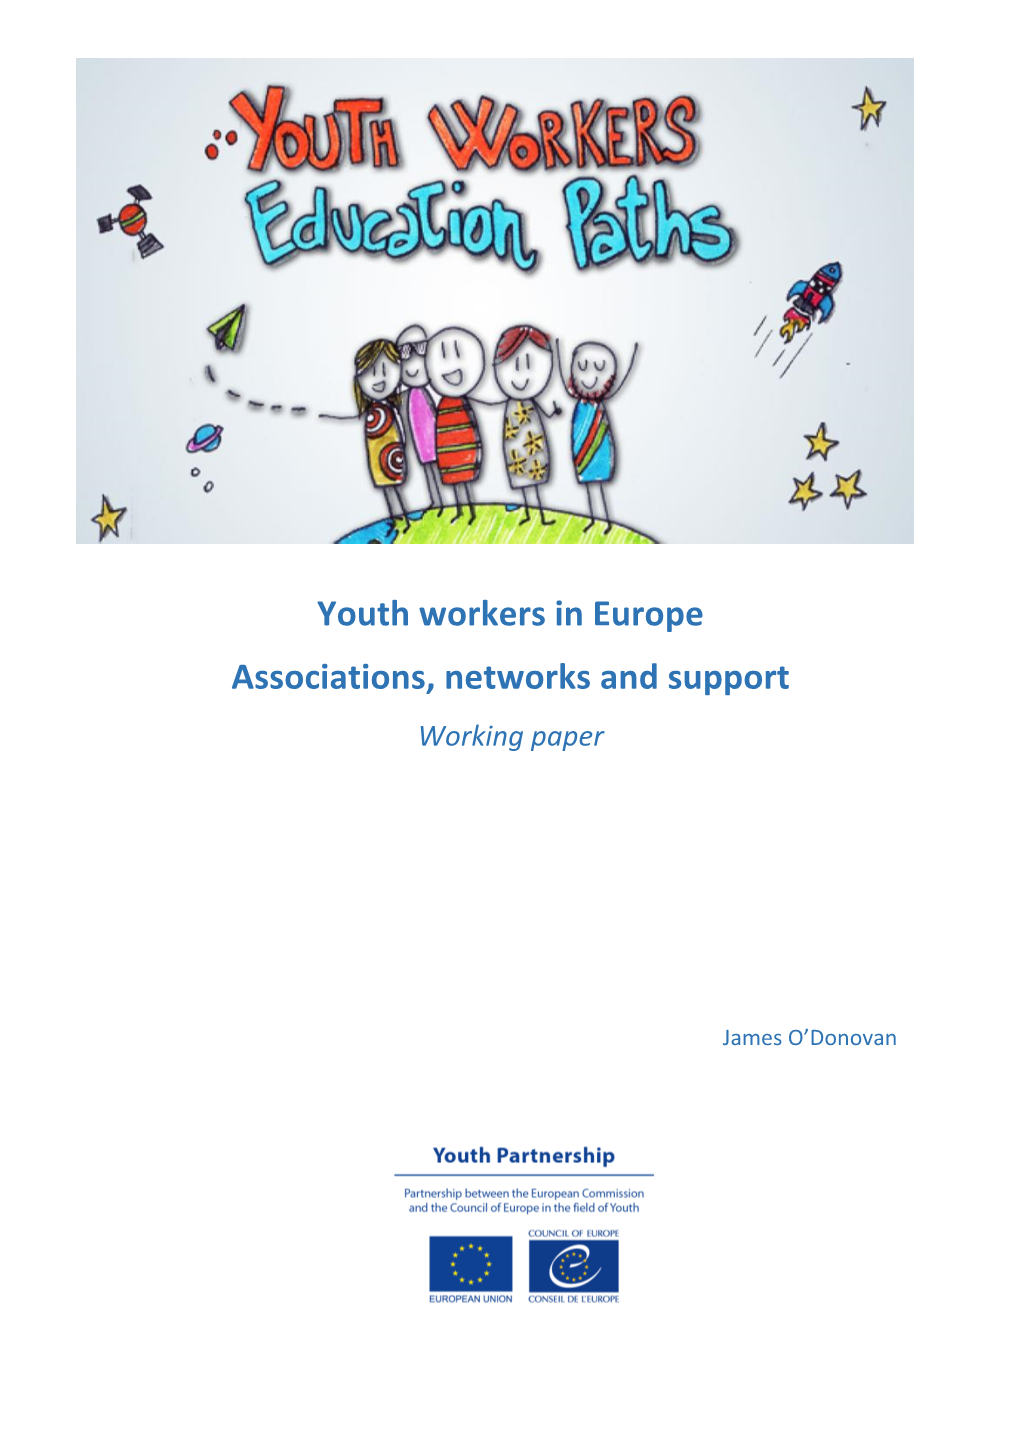 Youth Workers in Europe Associations, Networks and Support Working Paper